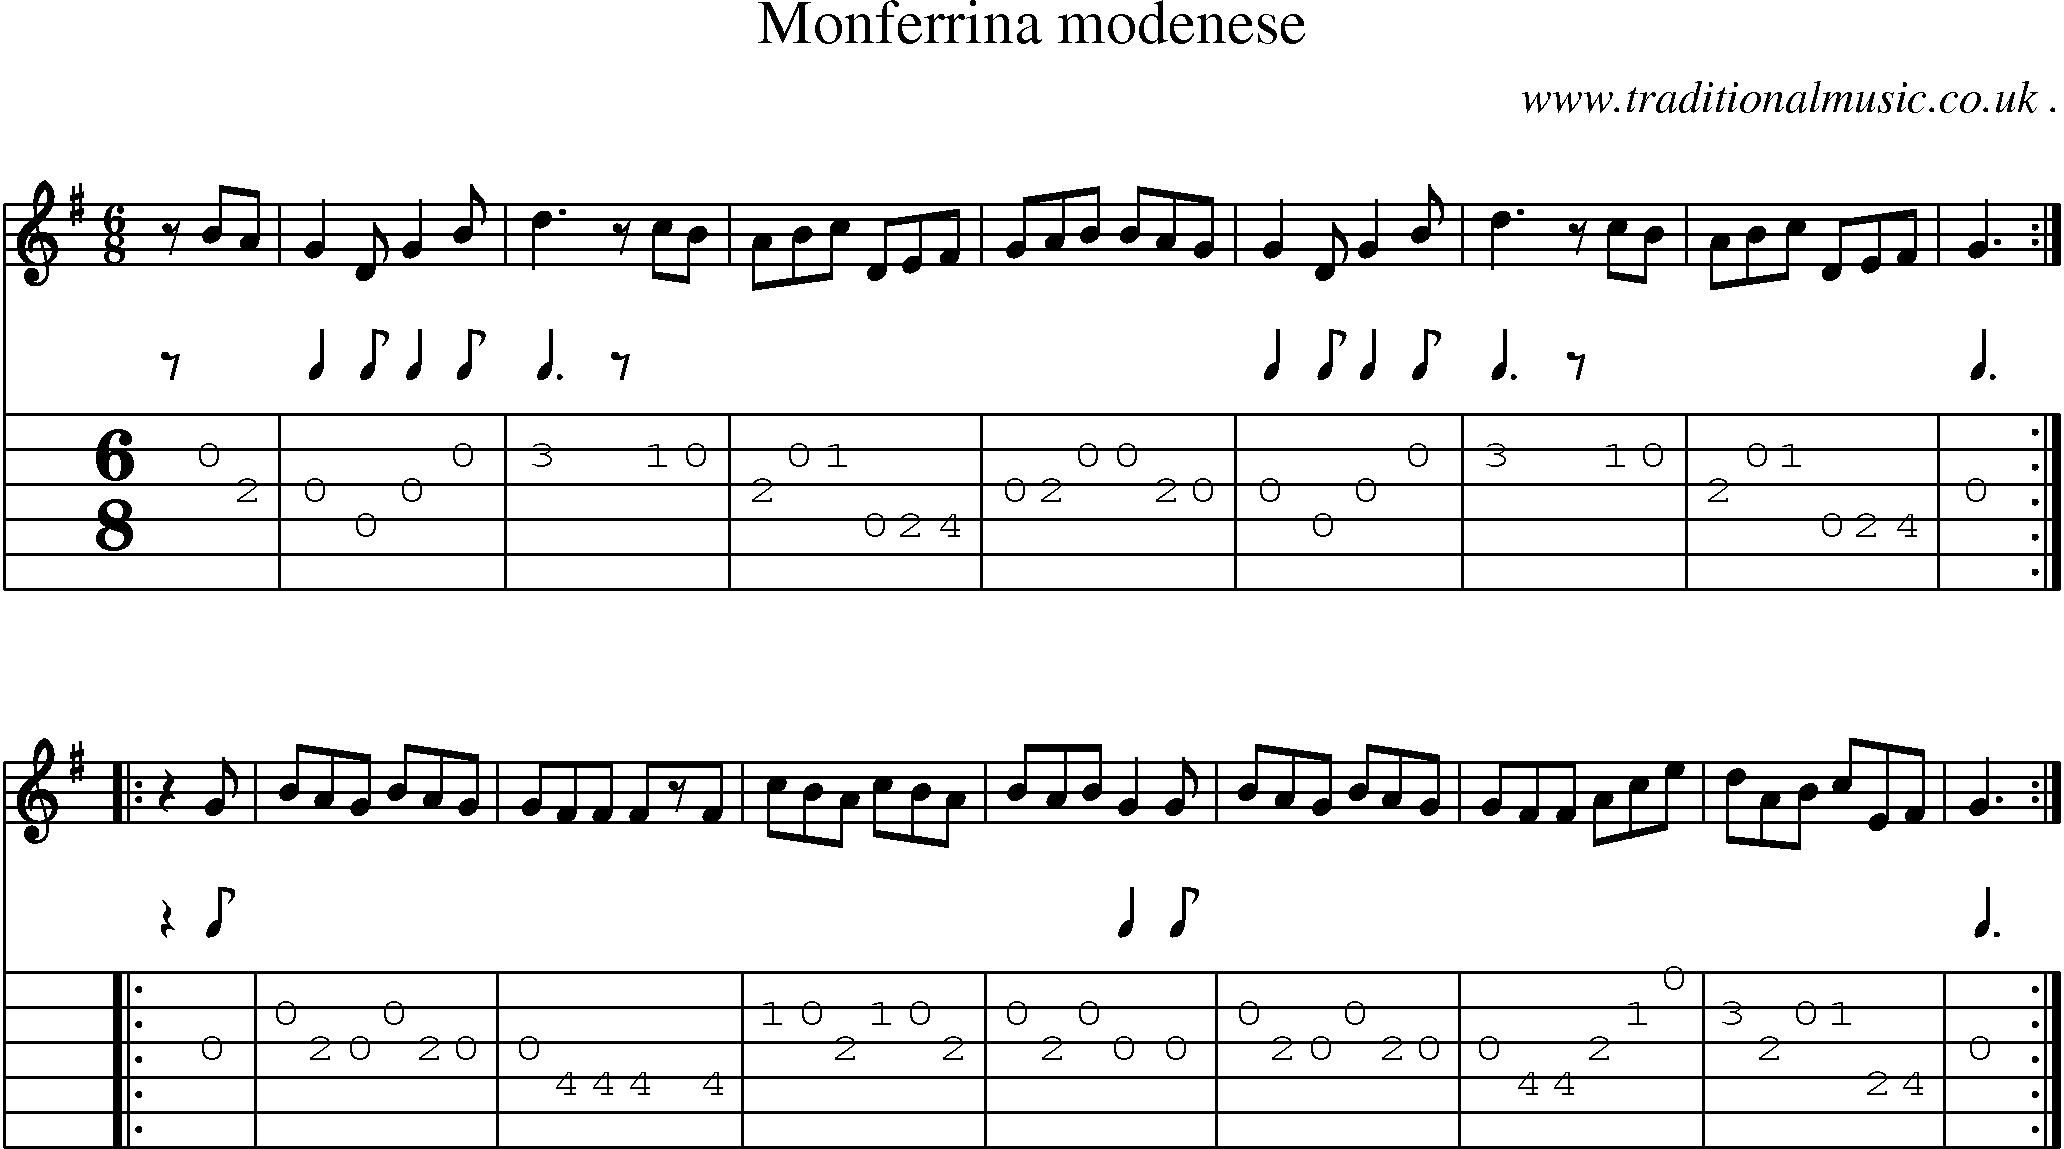 Sheet-Music and Guitar Tabs for Monferrina Modenese